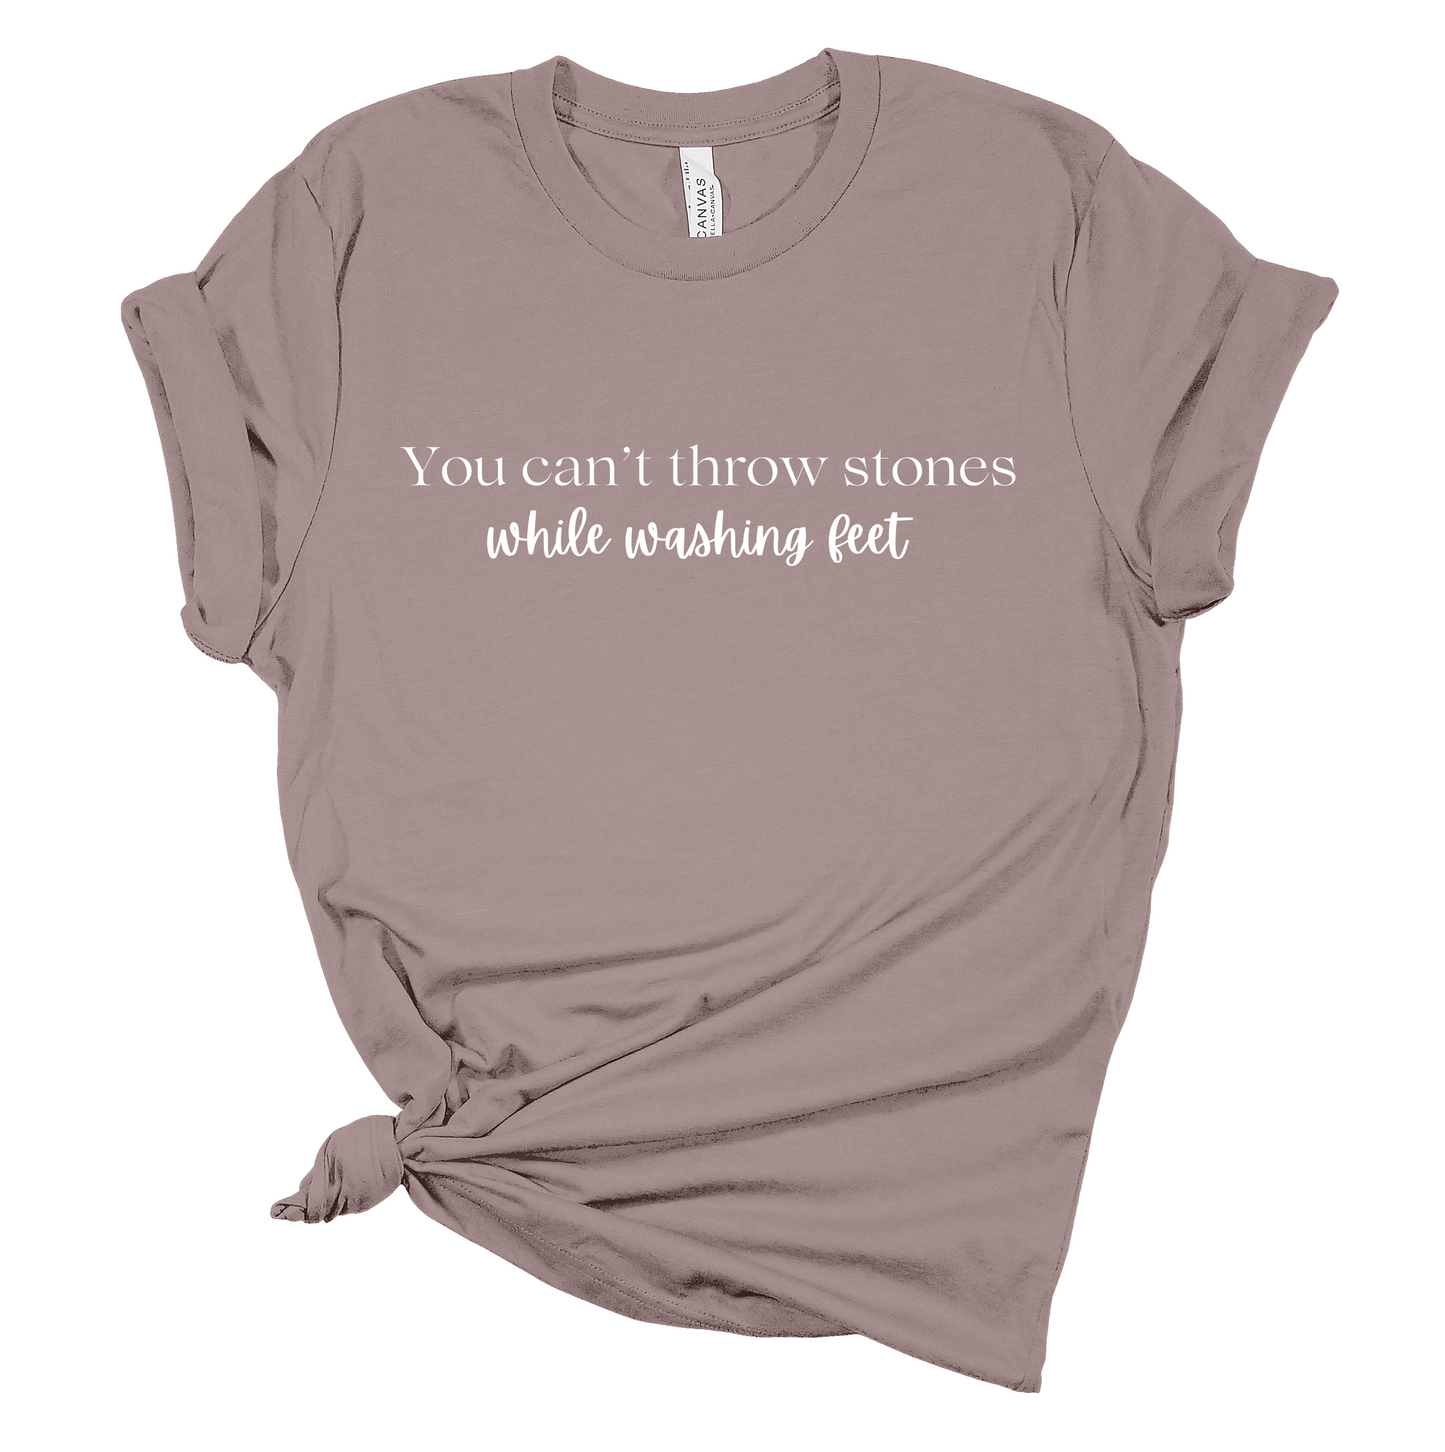 Can't Throw Stones Graphic Tee in Two Colors